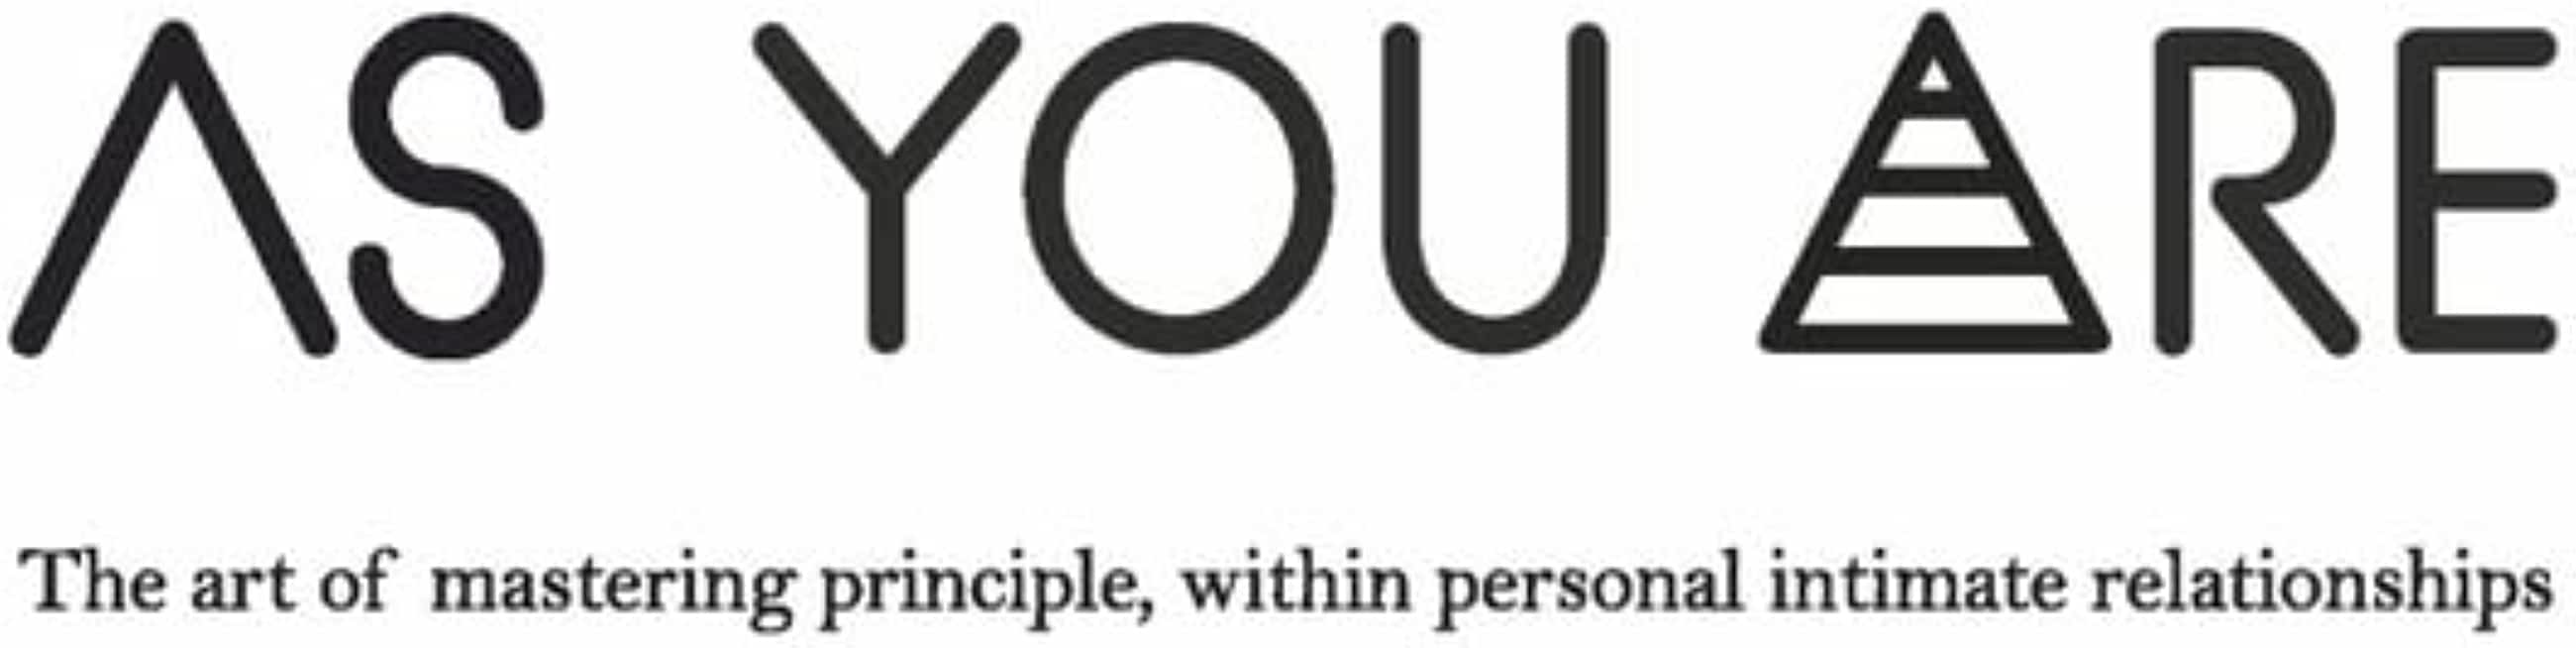 As You Are: The Art of Mastering Principle, Within Personal Intimate Relationships